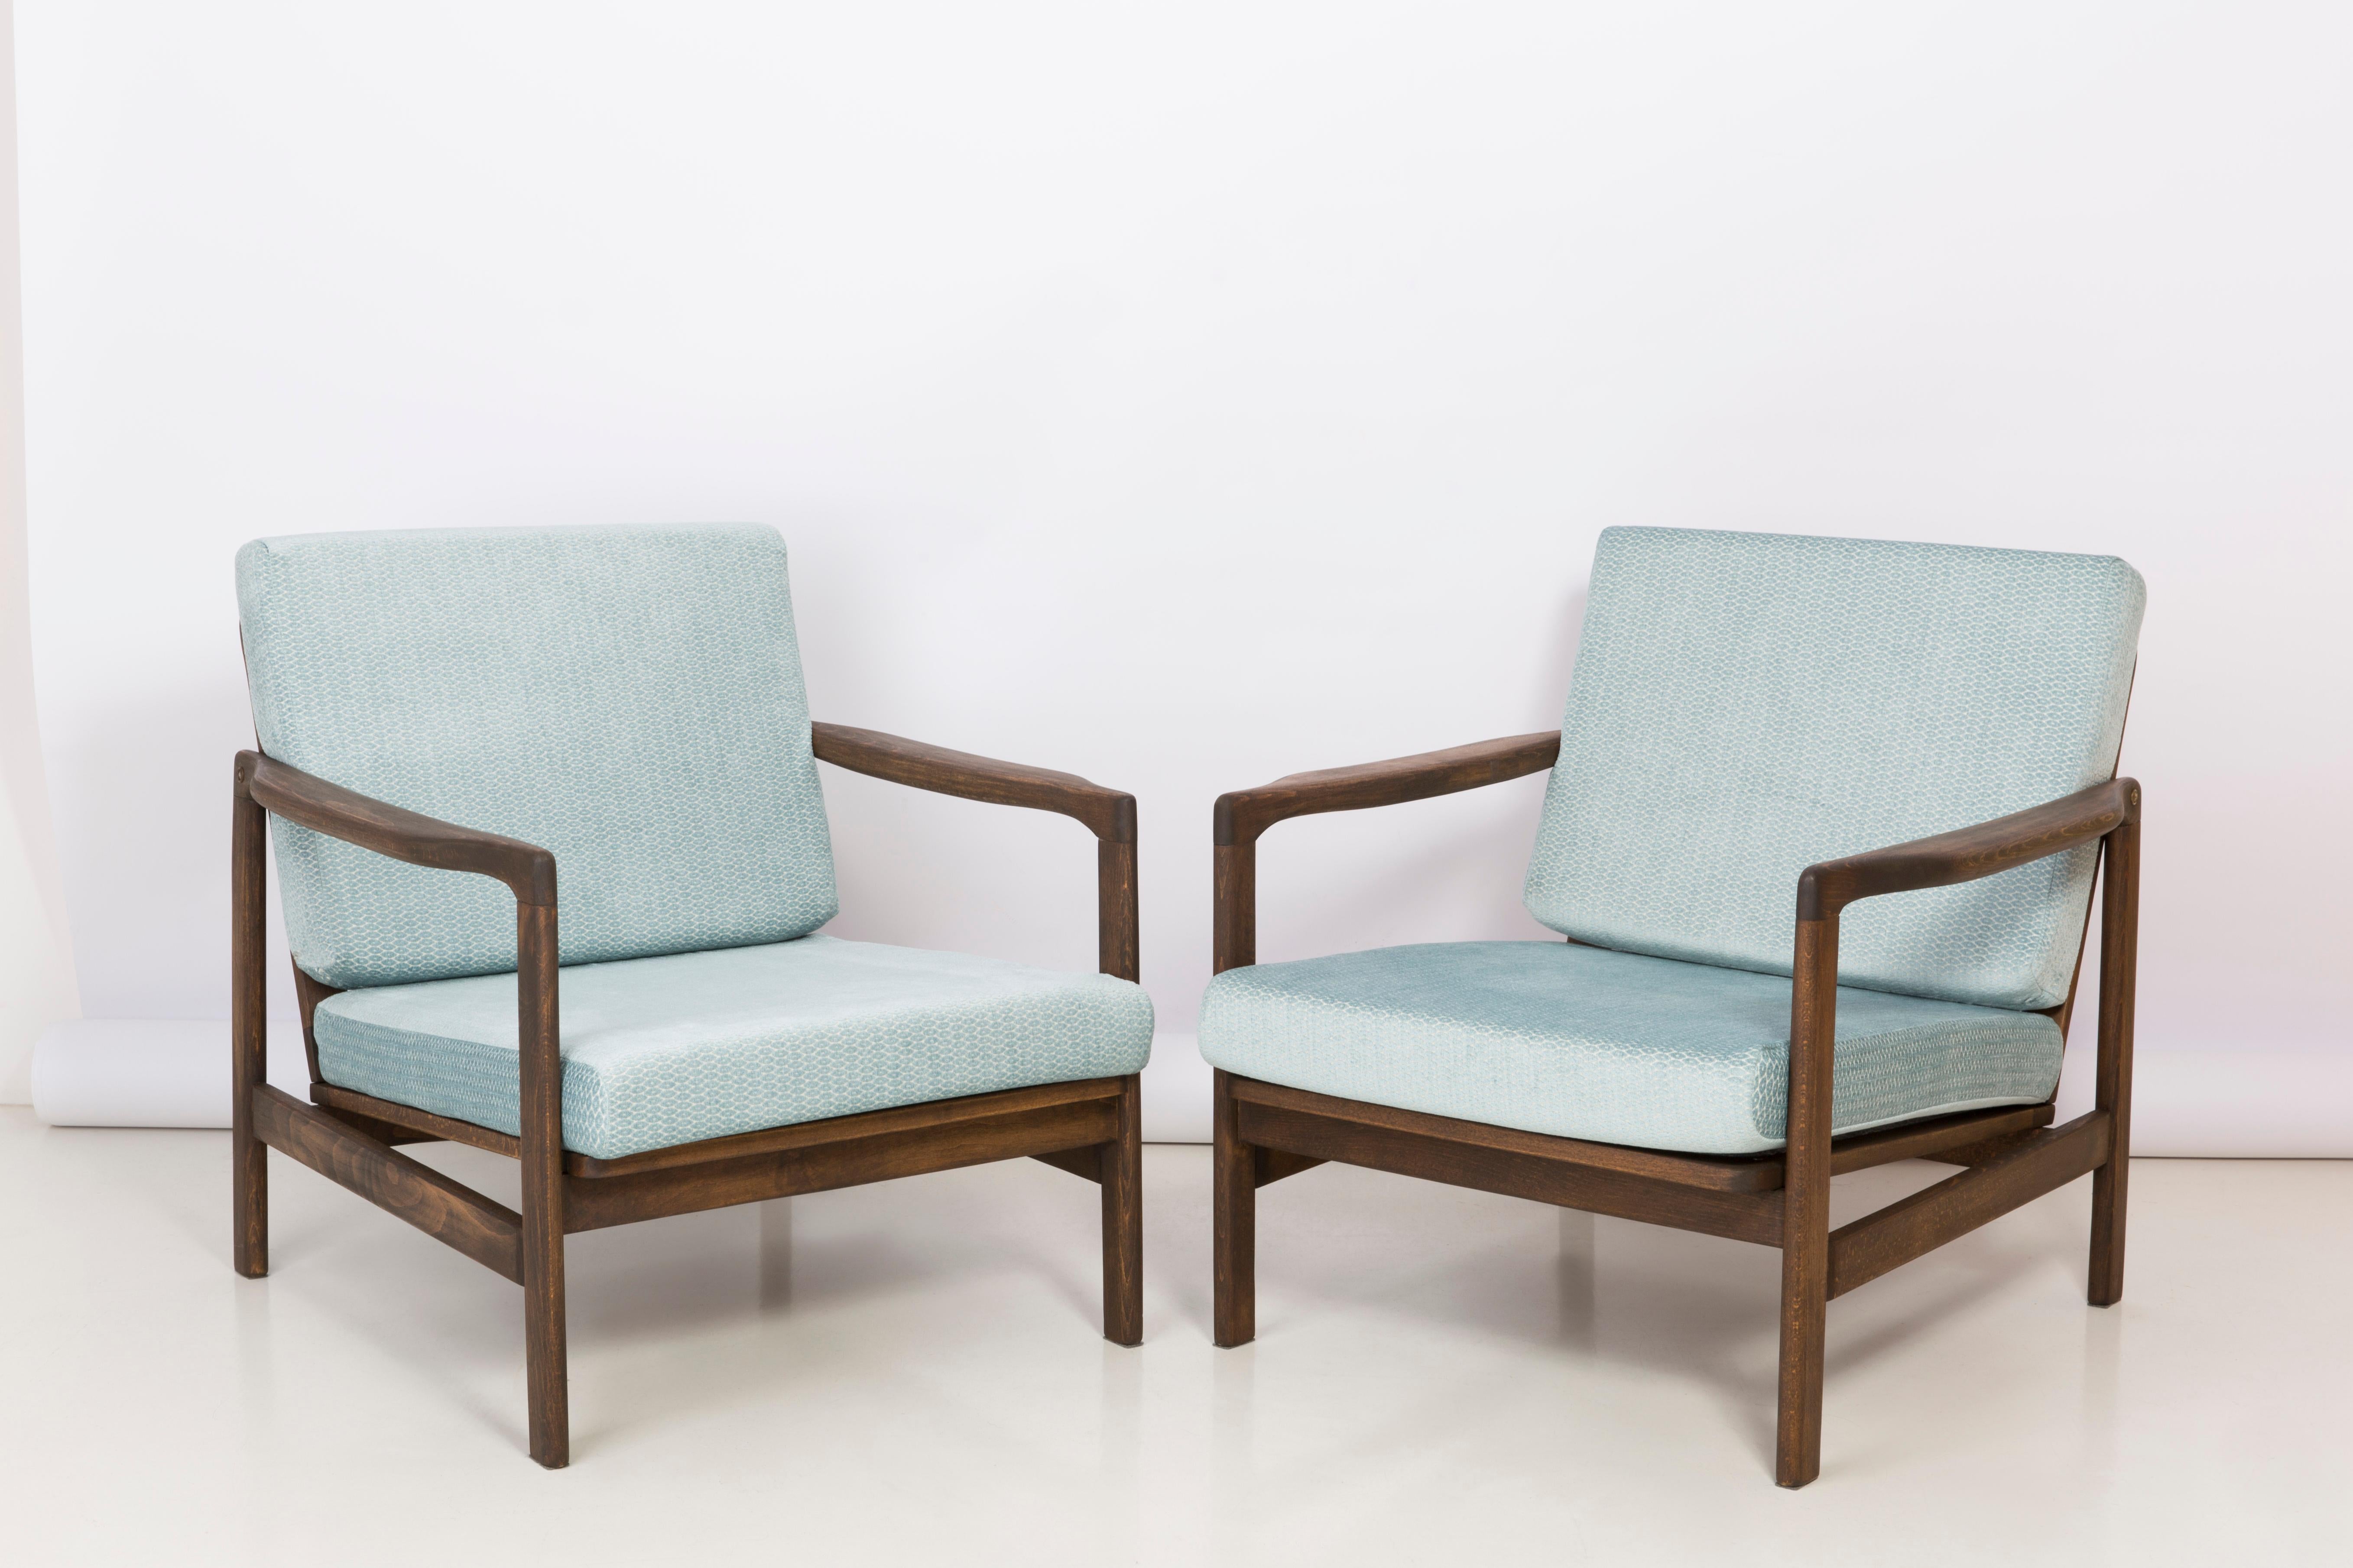 The B-7522 armchairs was designed in the 1960s by Zenon Baczyk, it was produced by Swarzedz furniture factories in Poland. Furniture kept in perfect condition, after full upholstery and wood renovation. Stabile and very comfortable armchair, dressed